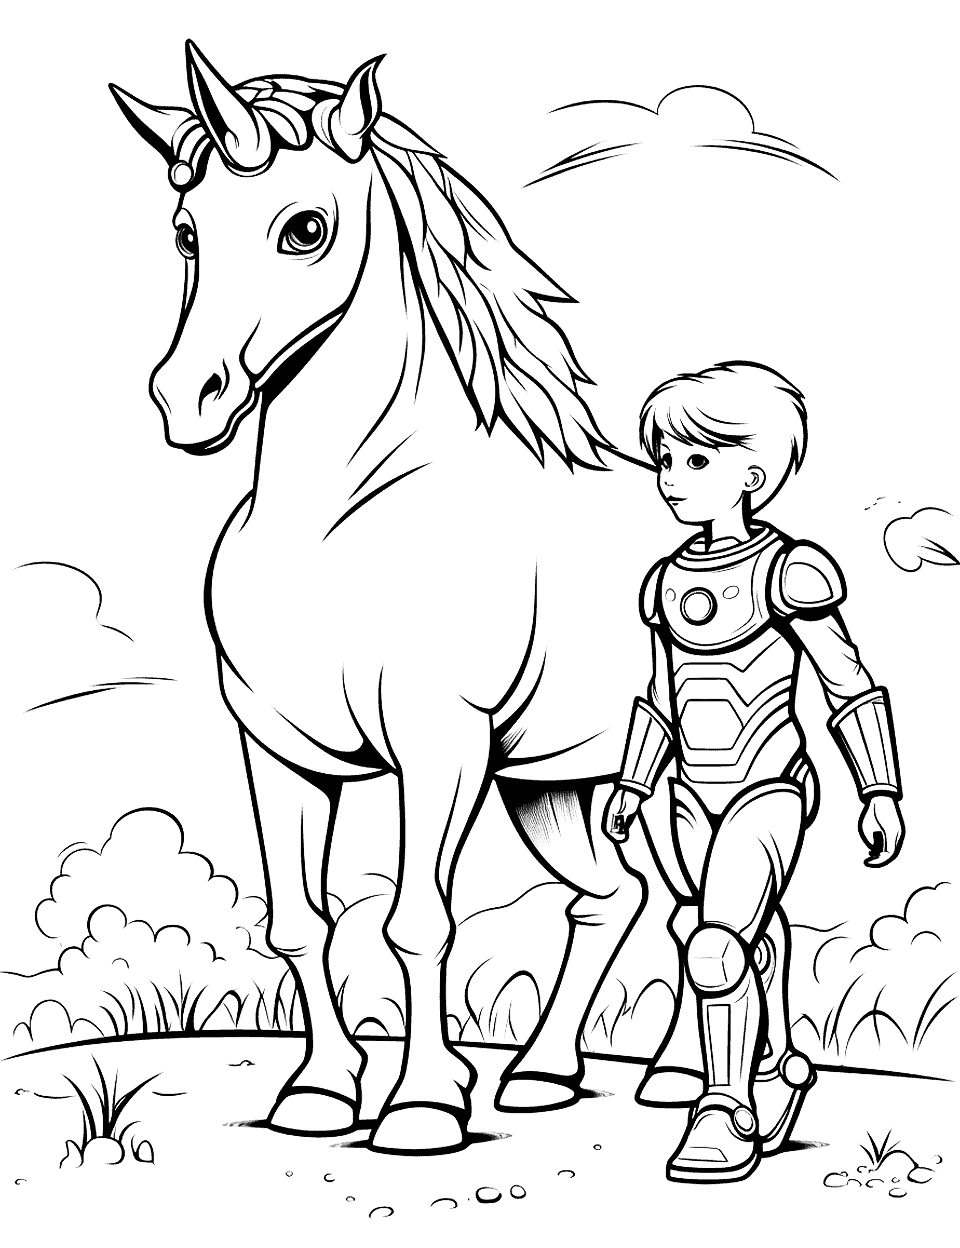 Unicorn and Robot Coloring Page - A futuristic scene of a unicorn interacting with a friendly robot.